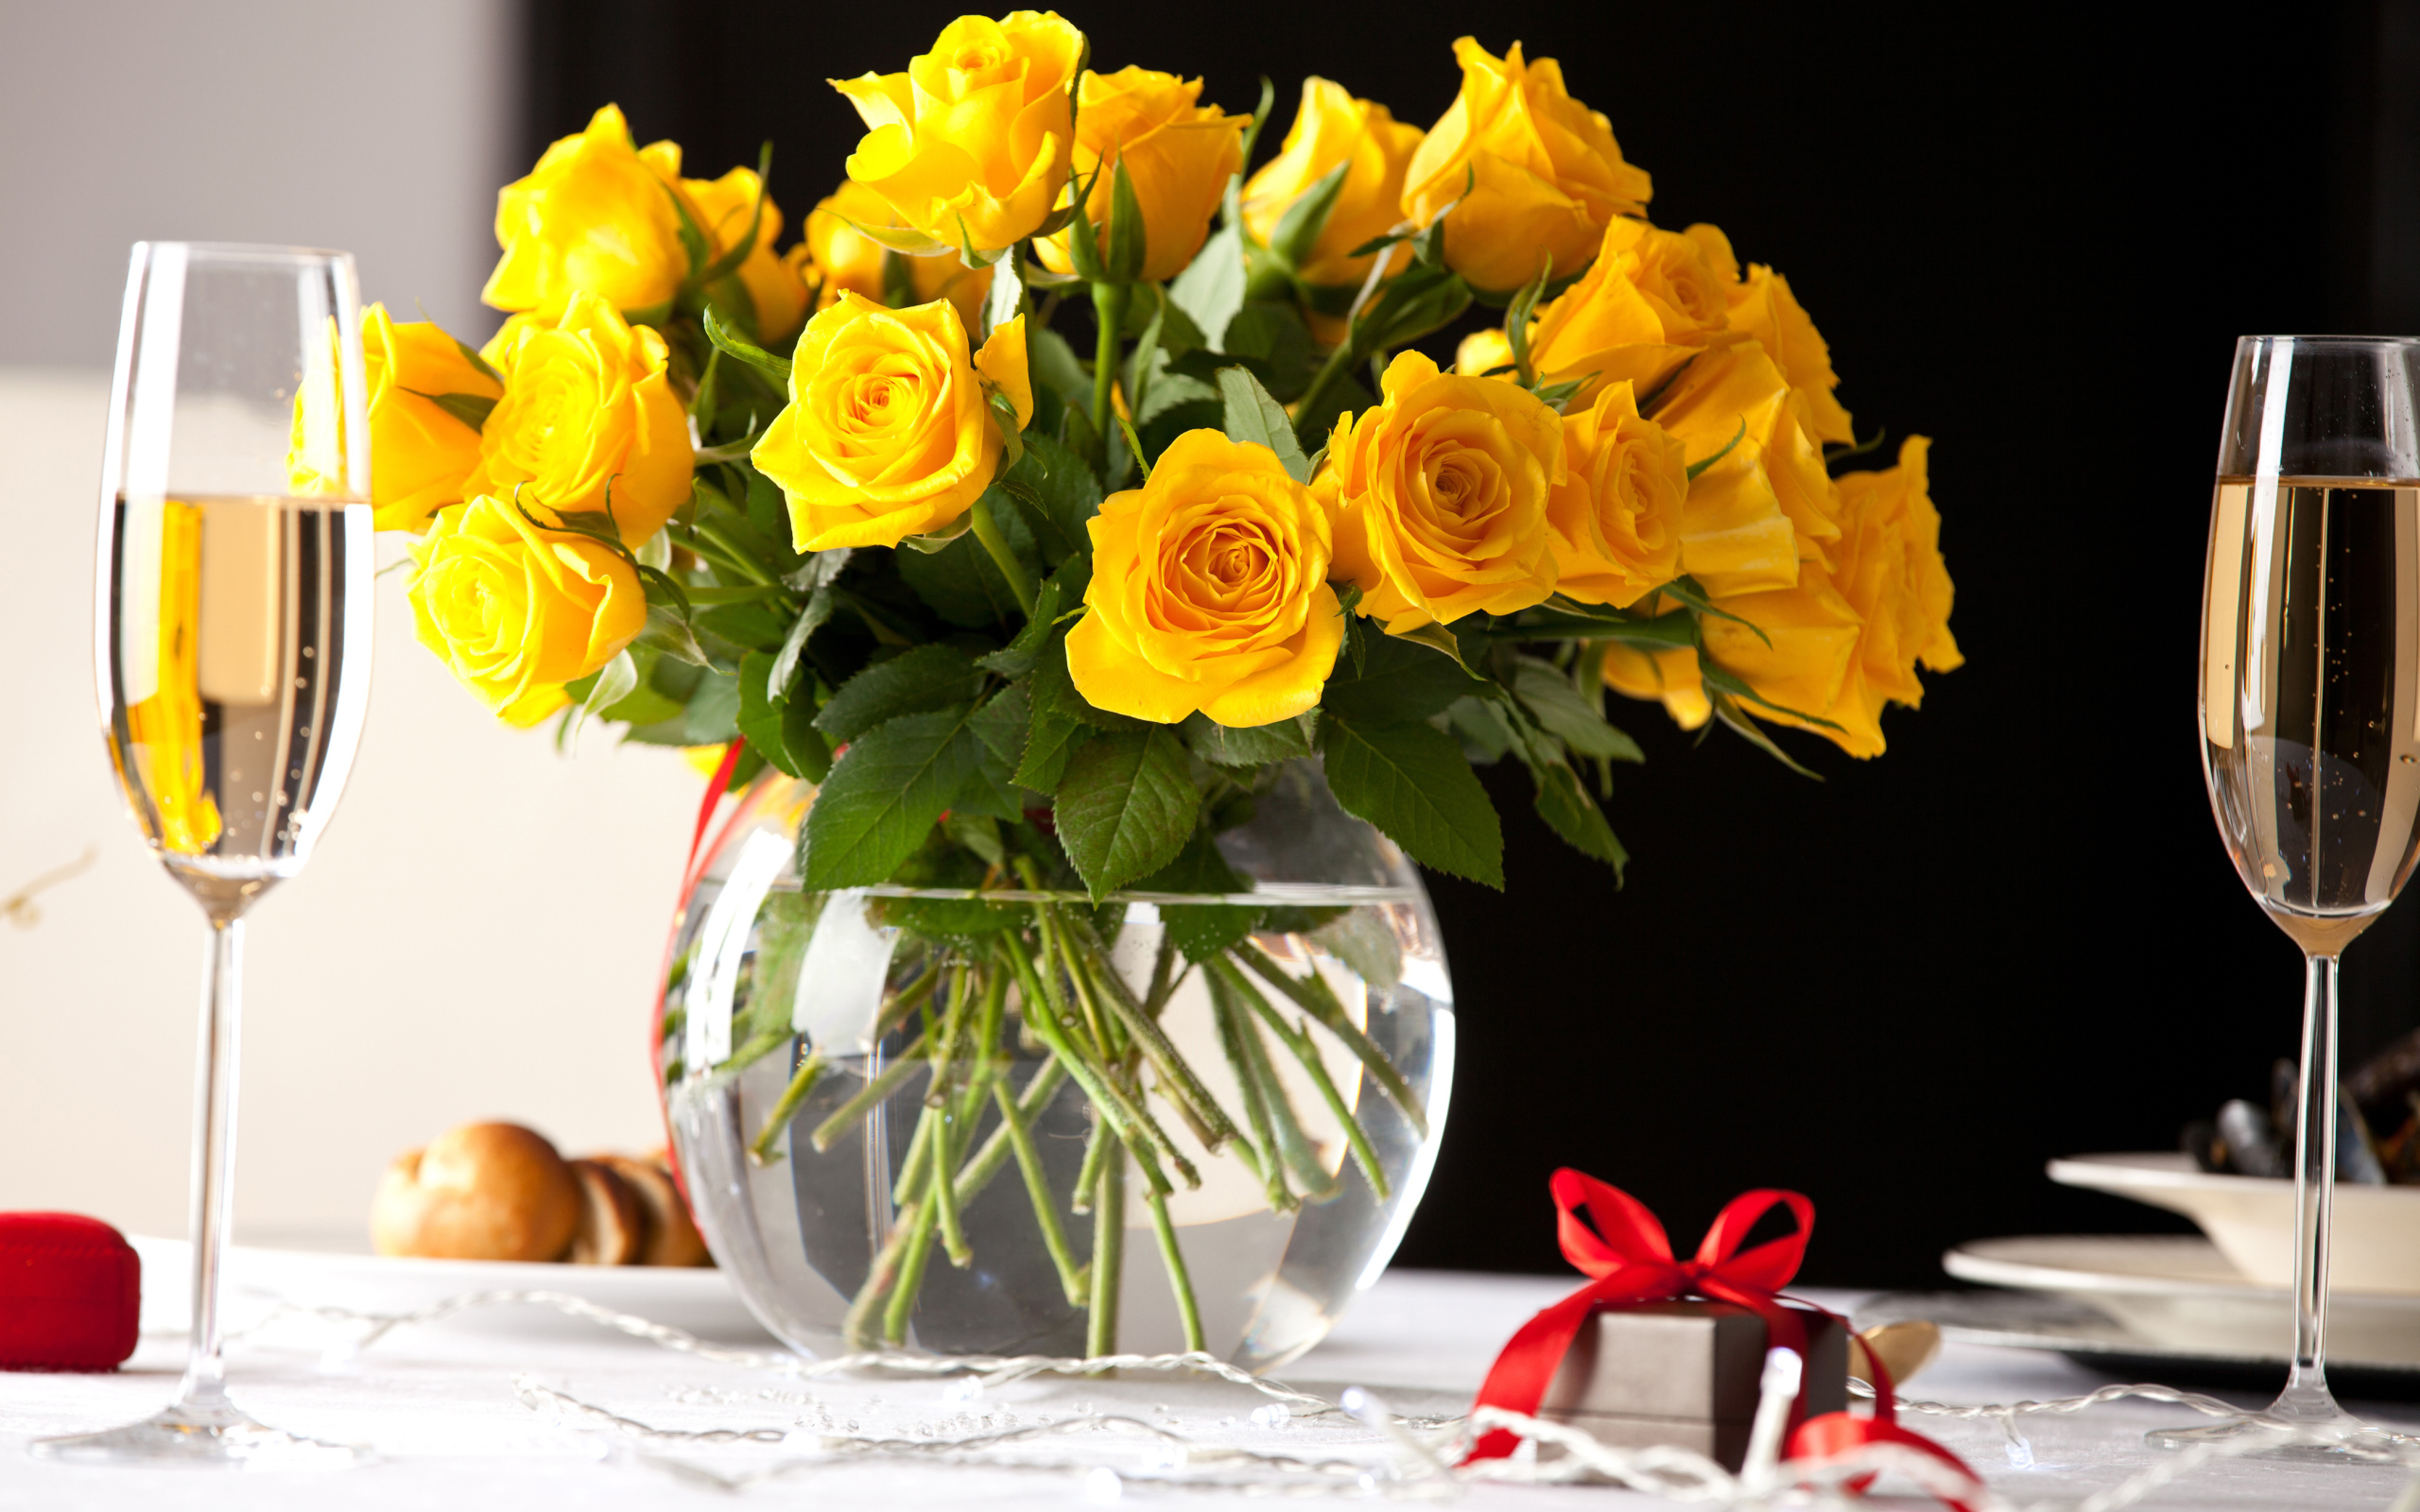 Bouquet of yellow roses in a glass vase with glasses of champagne on the table